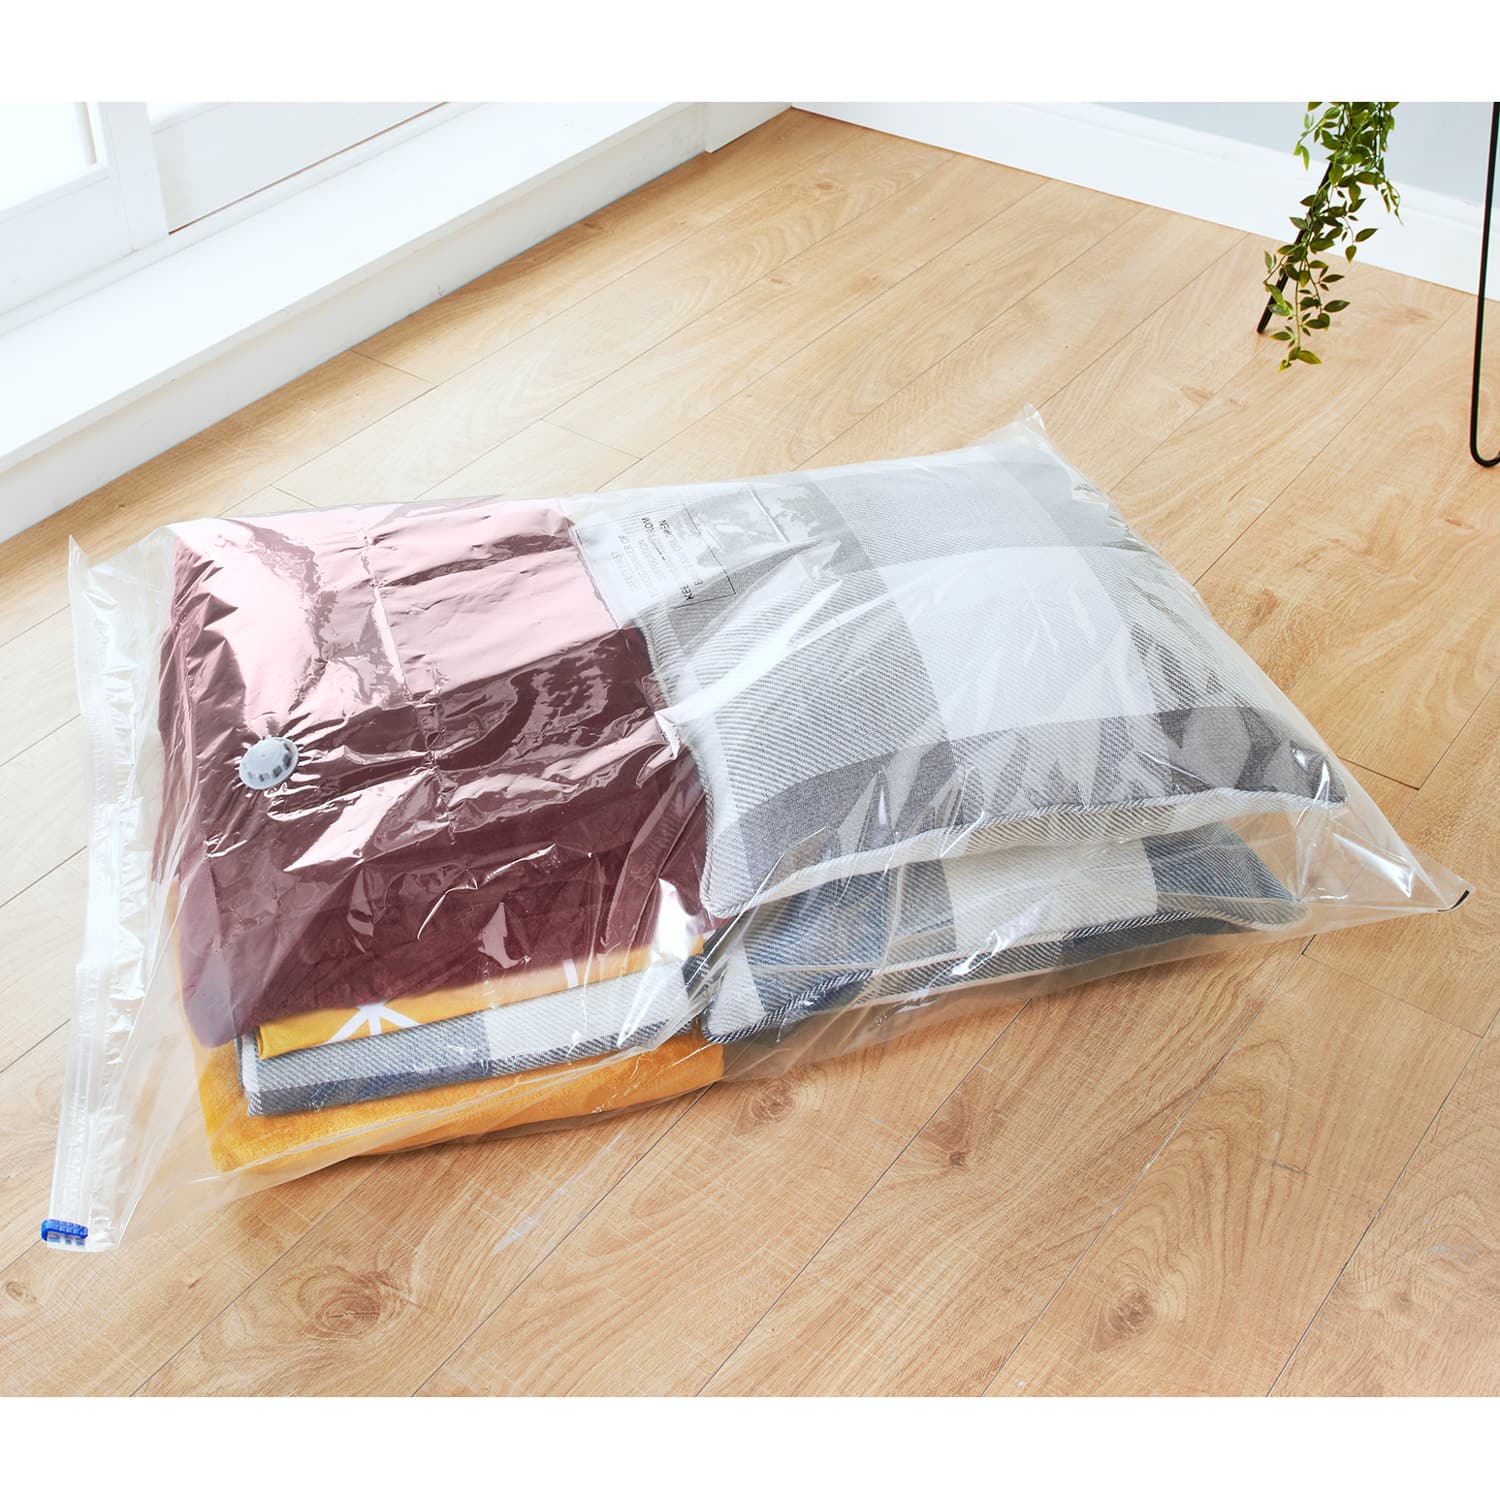 20 PACK VACUUM STORAGE BAGS BNBS SPACE SAVER BAGS FOR CLOTHES